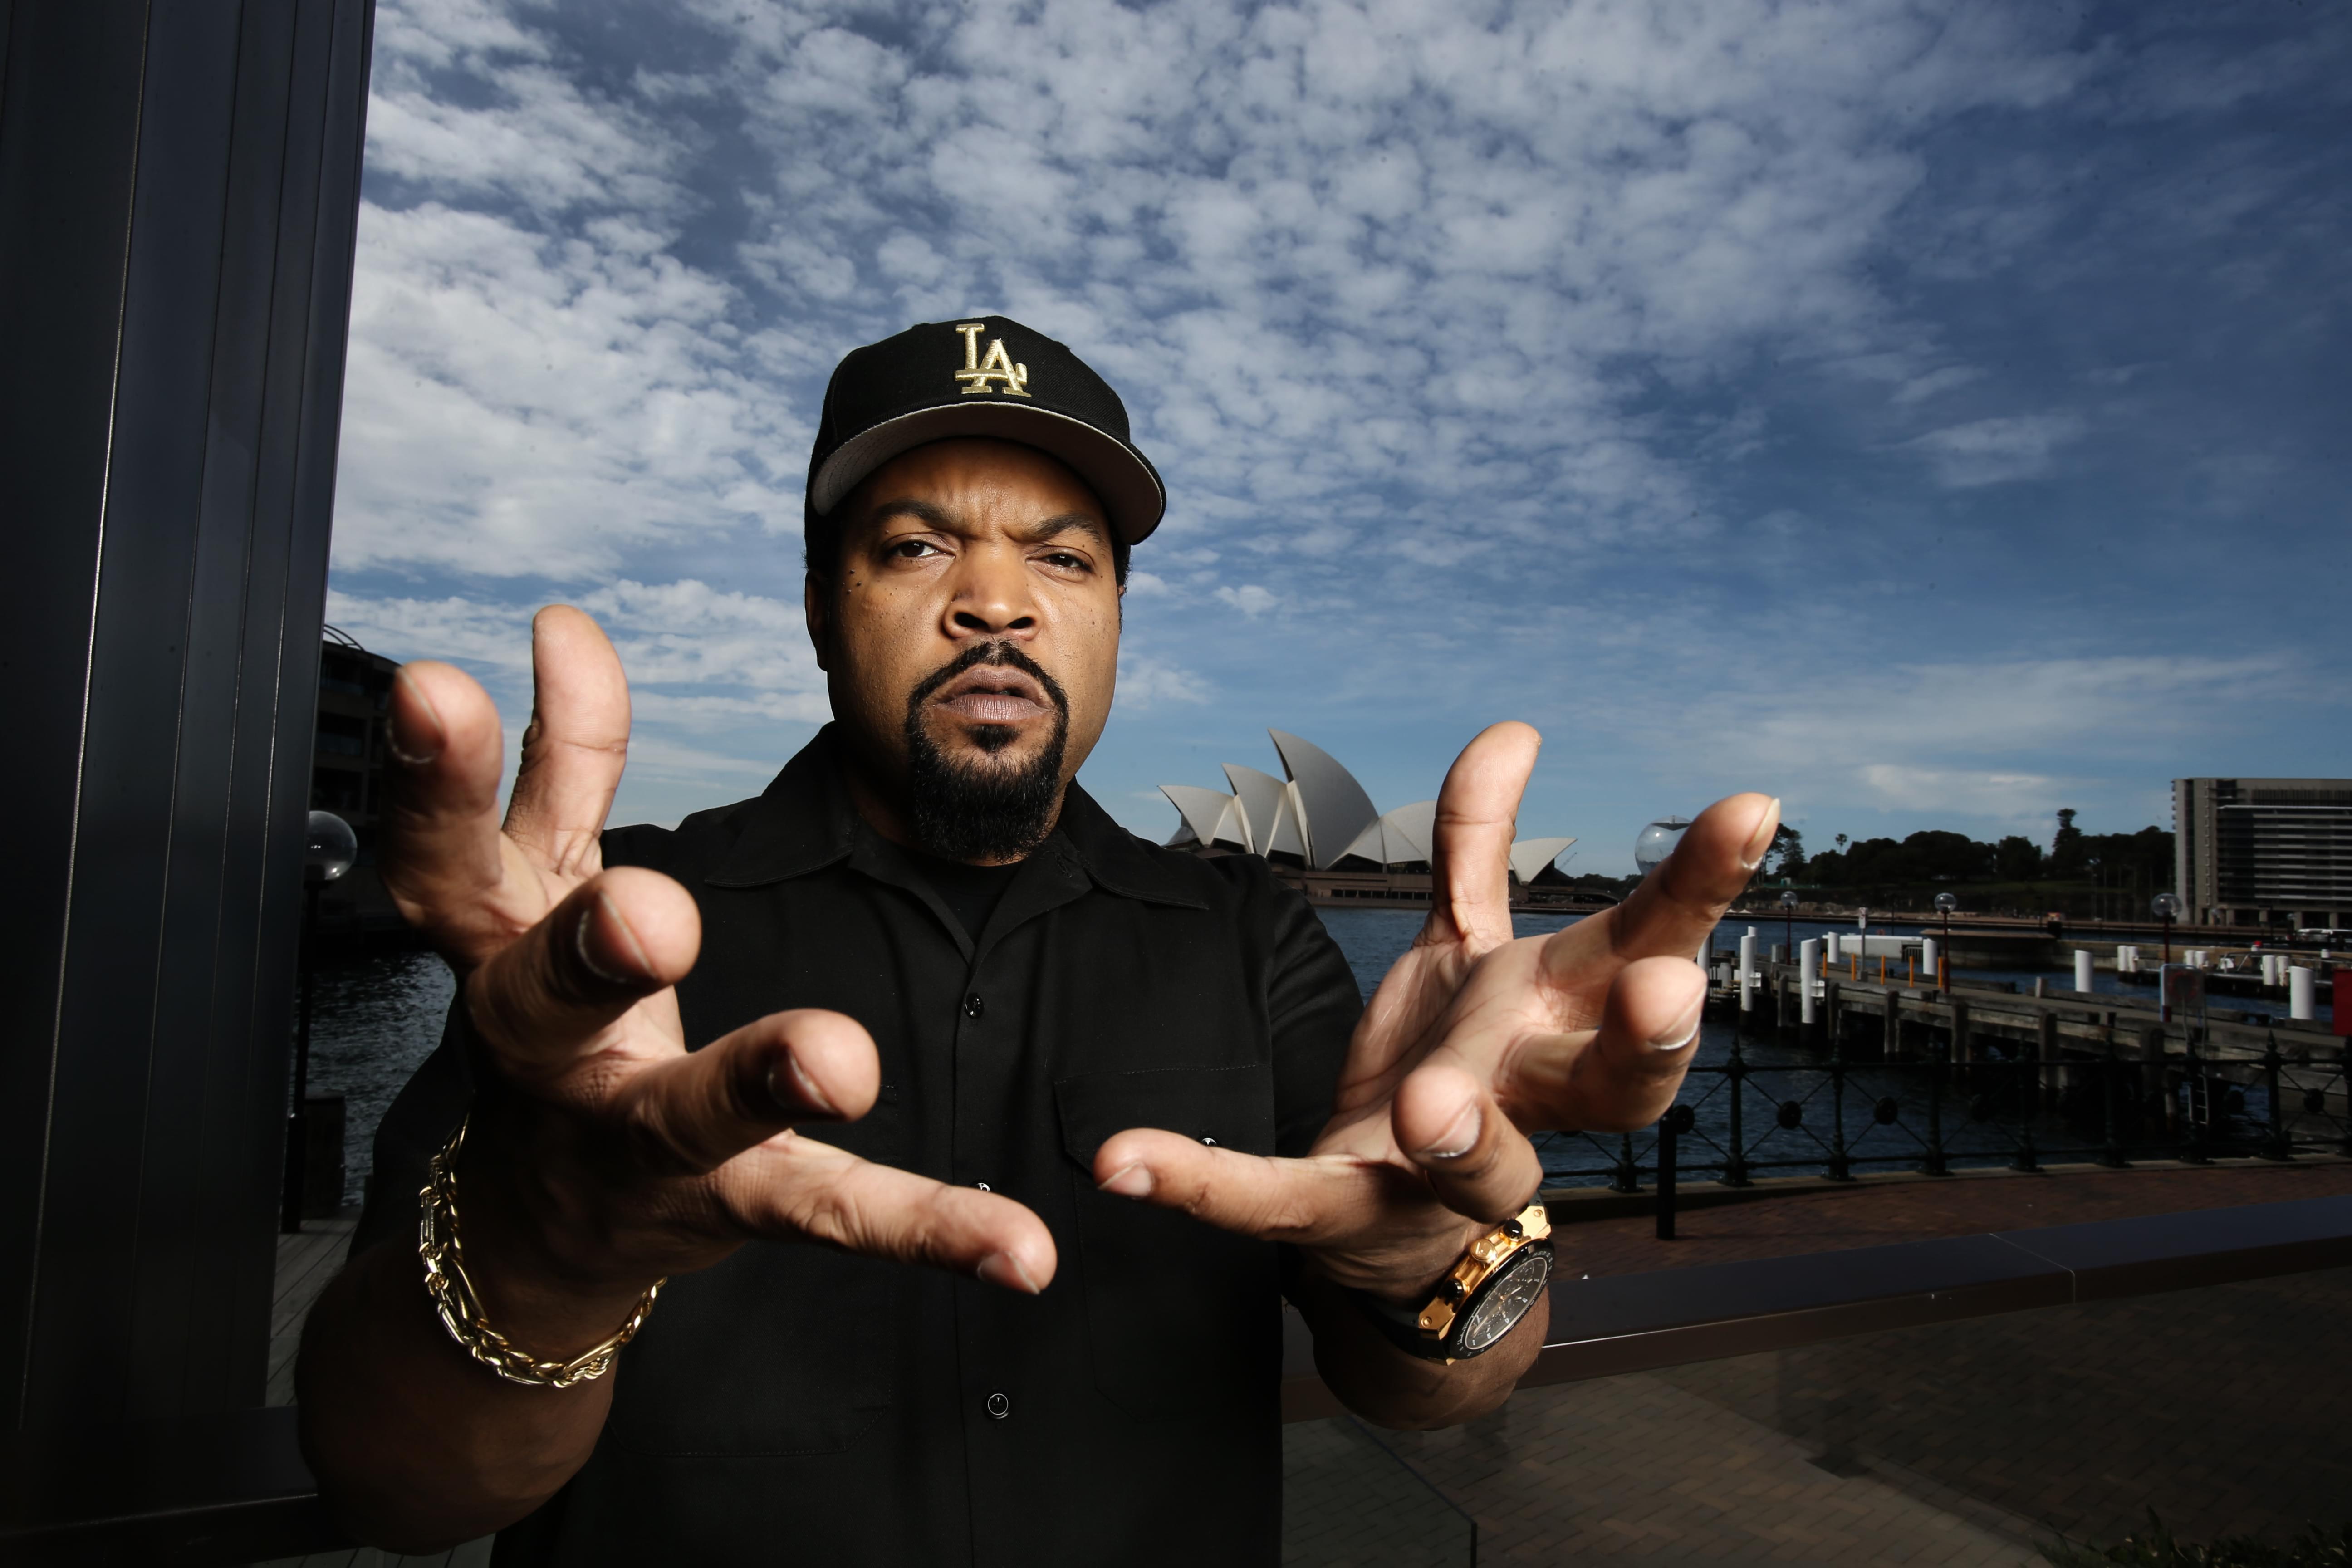 Does This Meeting With Ice Cube Confirm That LeBron James Is Coming To L.A.? [WATCH]